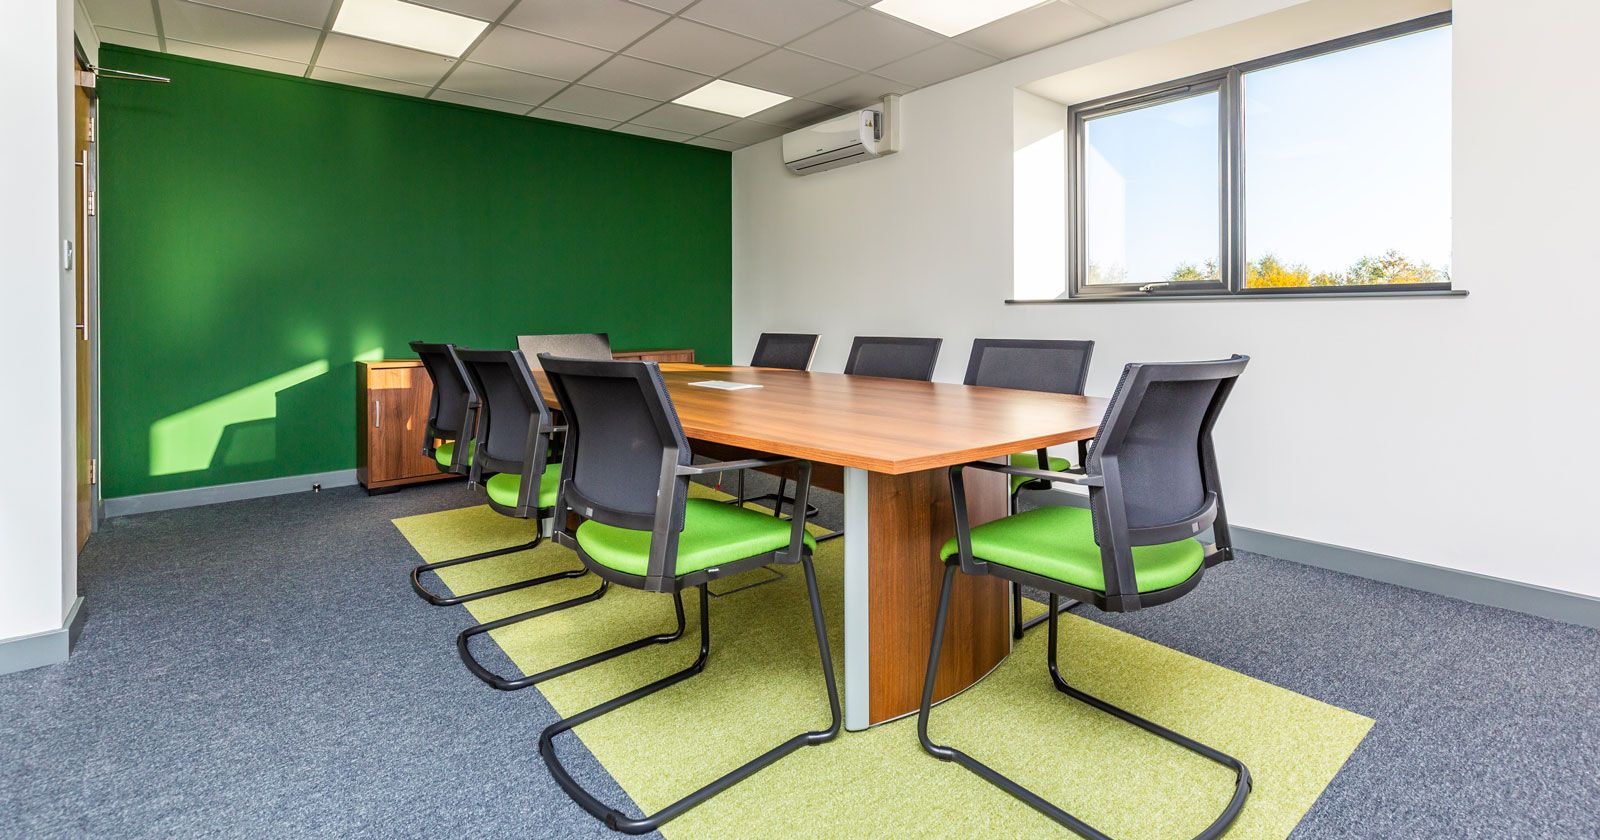 British Hardwood Tree Nursery Meeting Room Glass Partitions Green by APSS